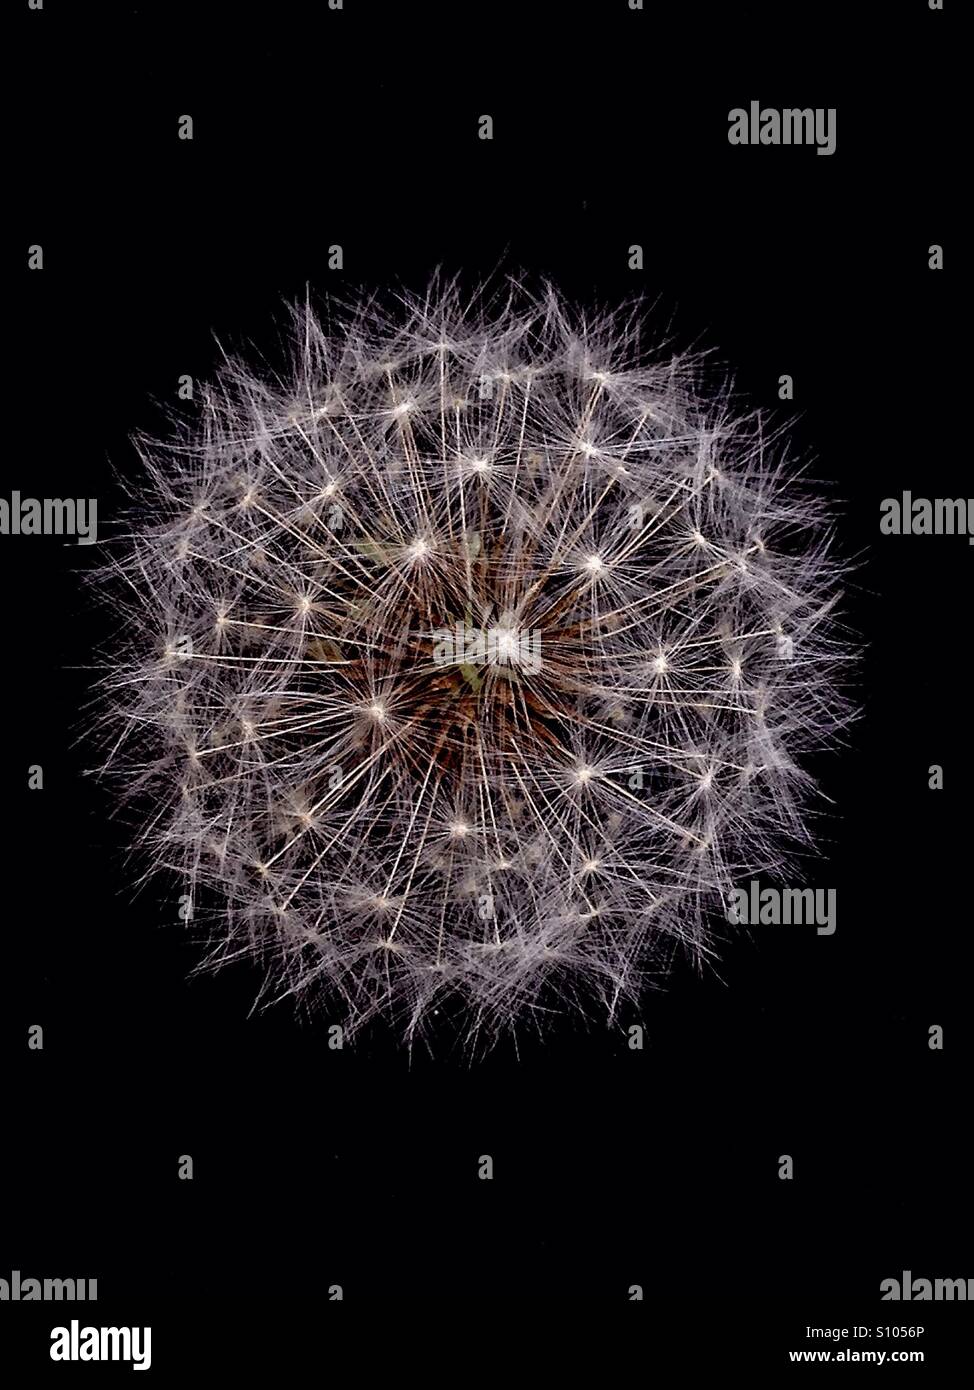 Dandelion seen against black background seen from above Stock Photo